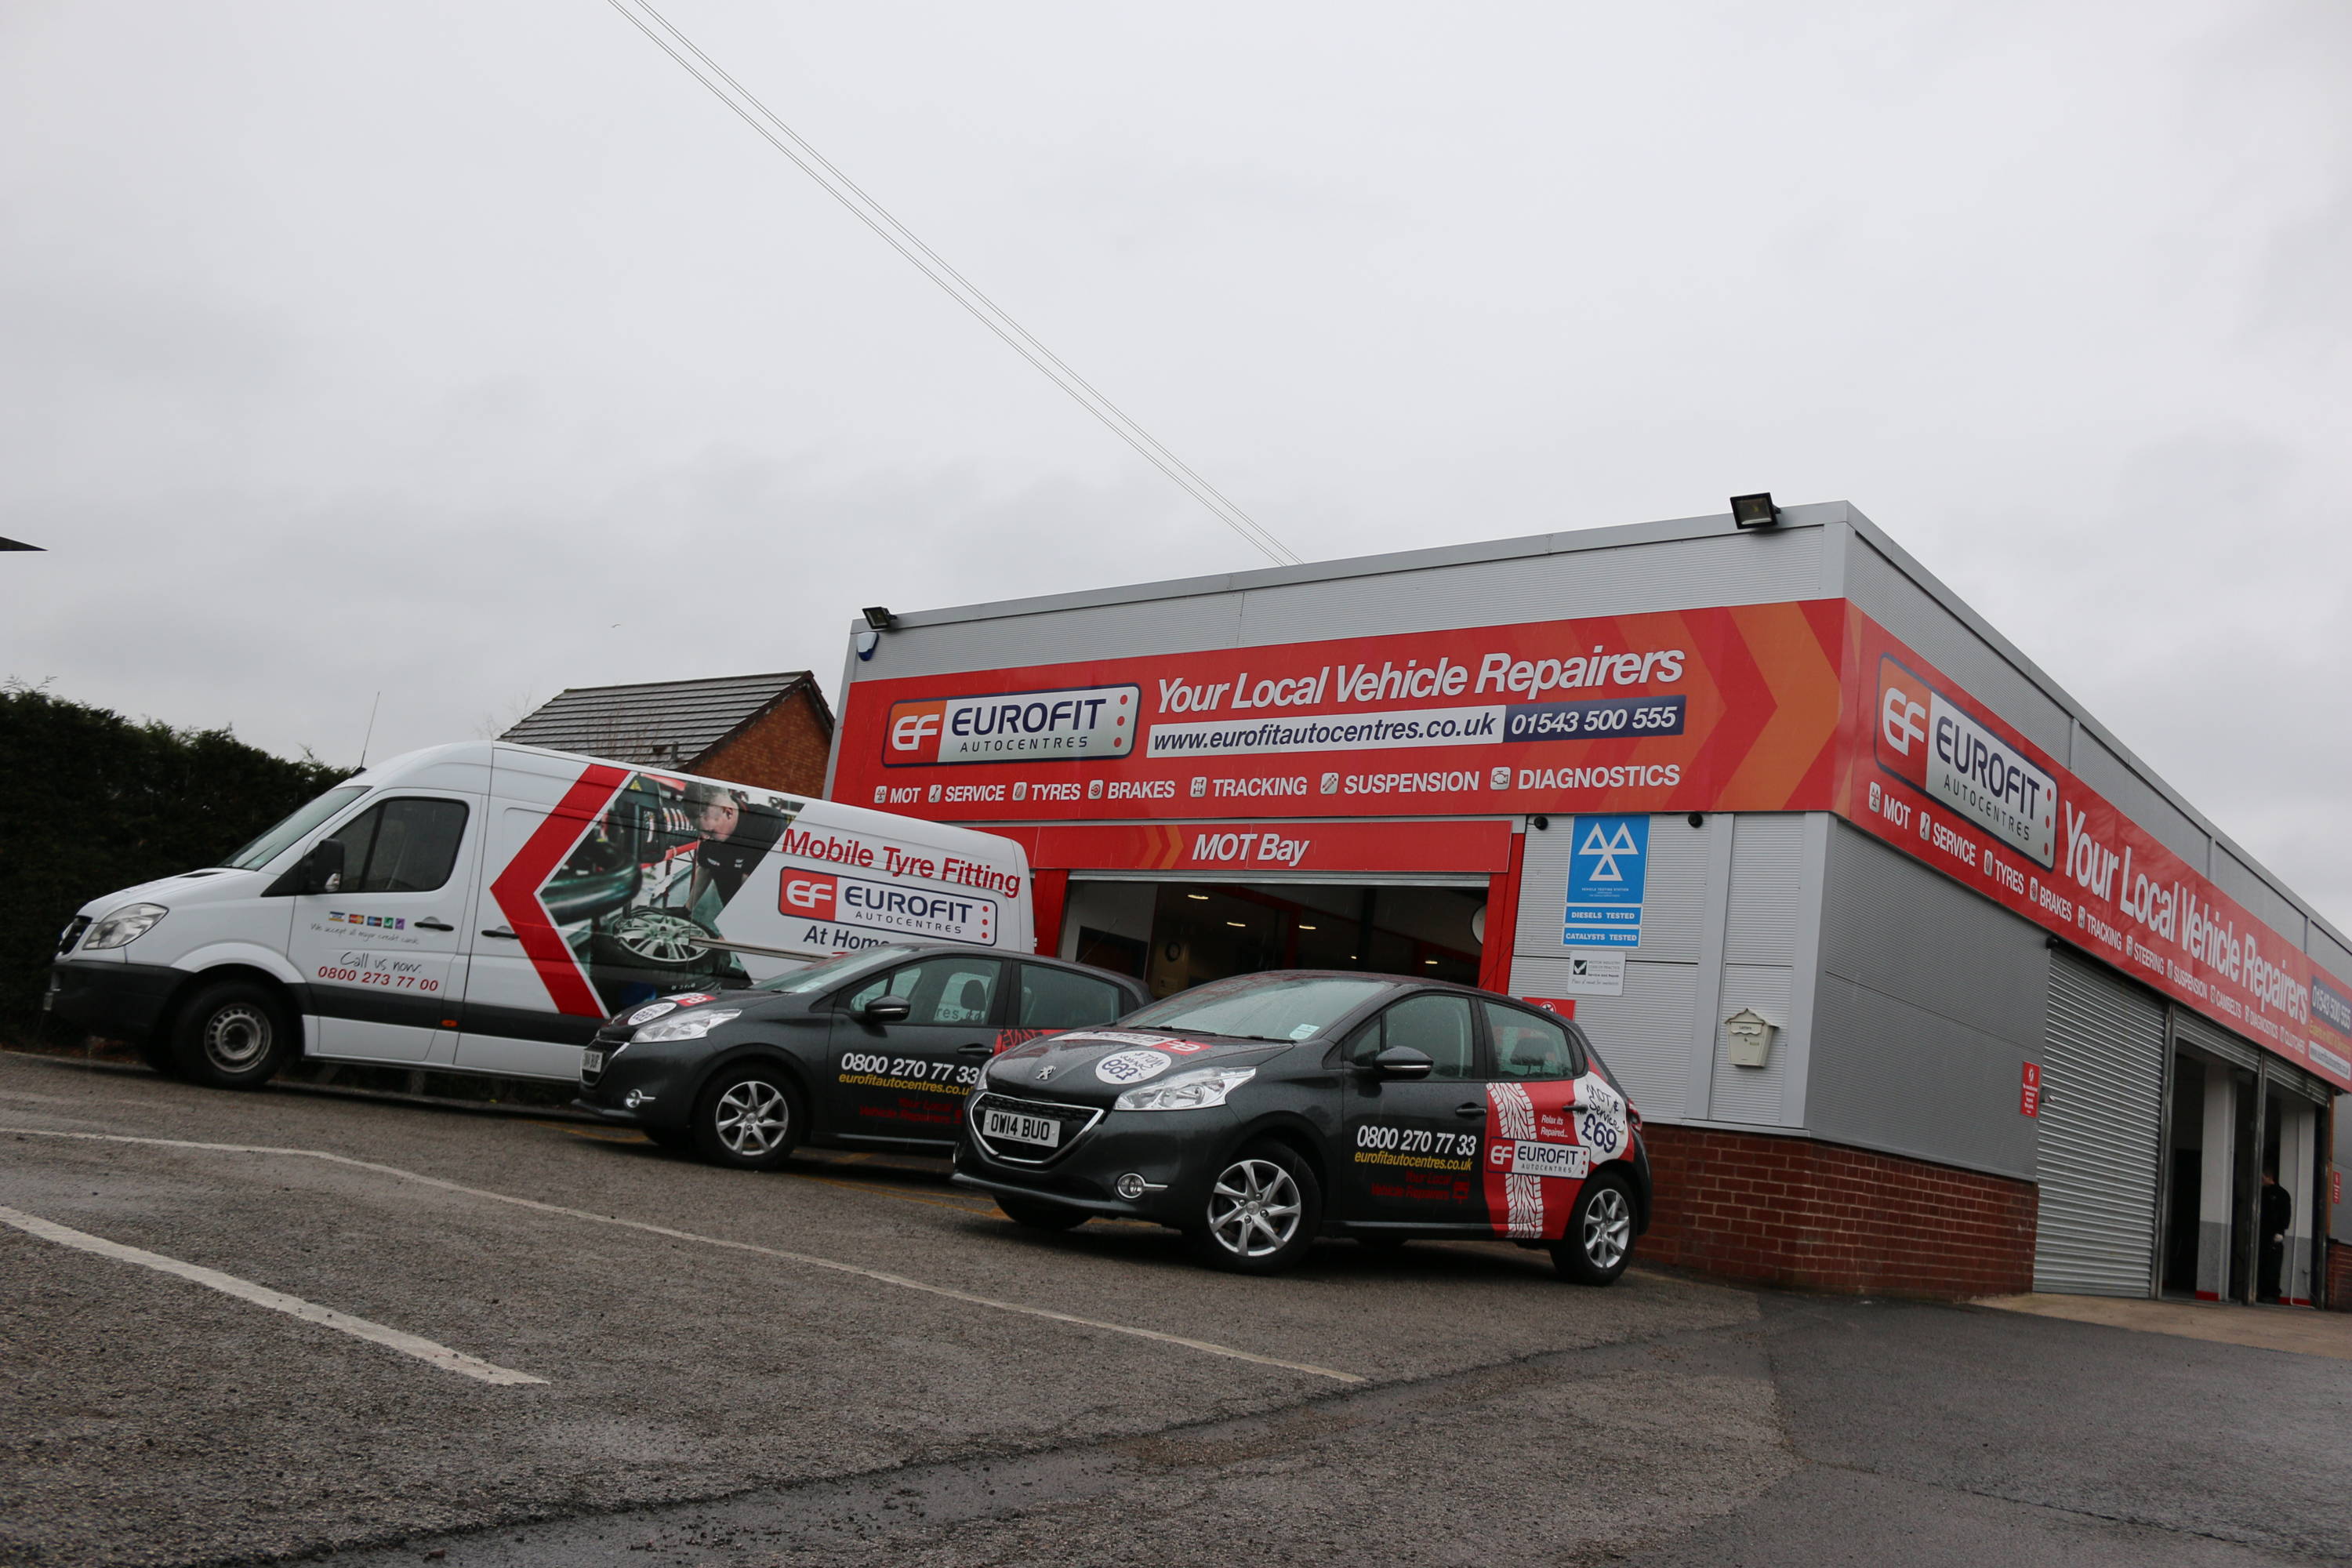 Outside Eurofit Cannock car garage with cars and vans parked outside with logo on